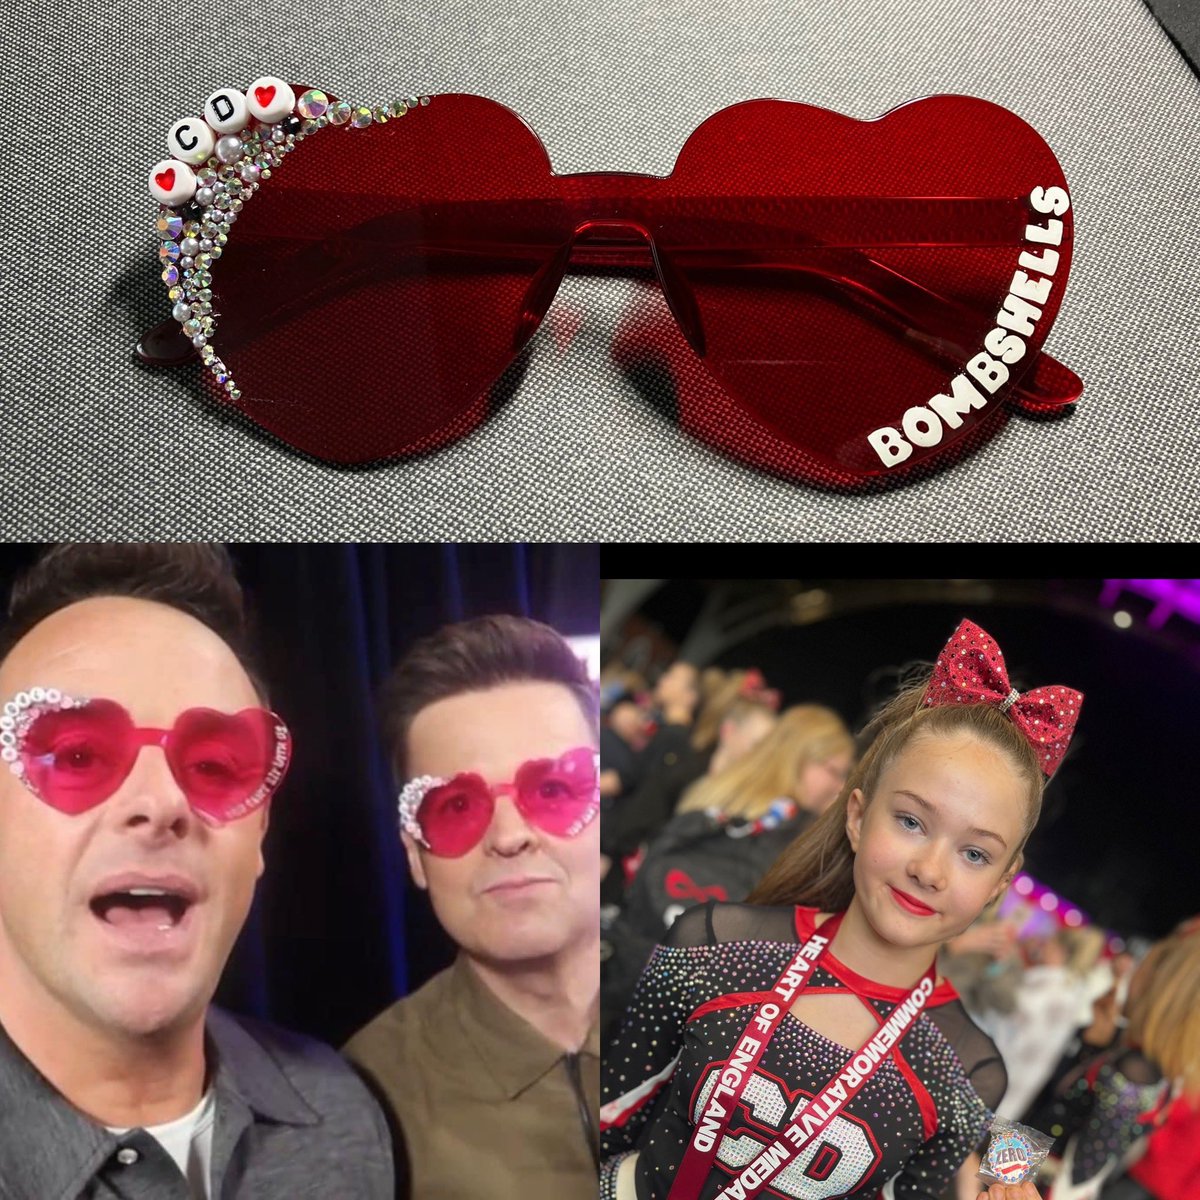 Sunnies ready for Florida as modelled here by @antanddec #allstarworldschampionships